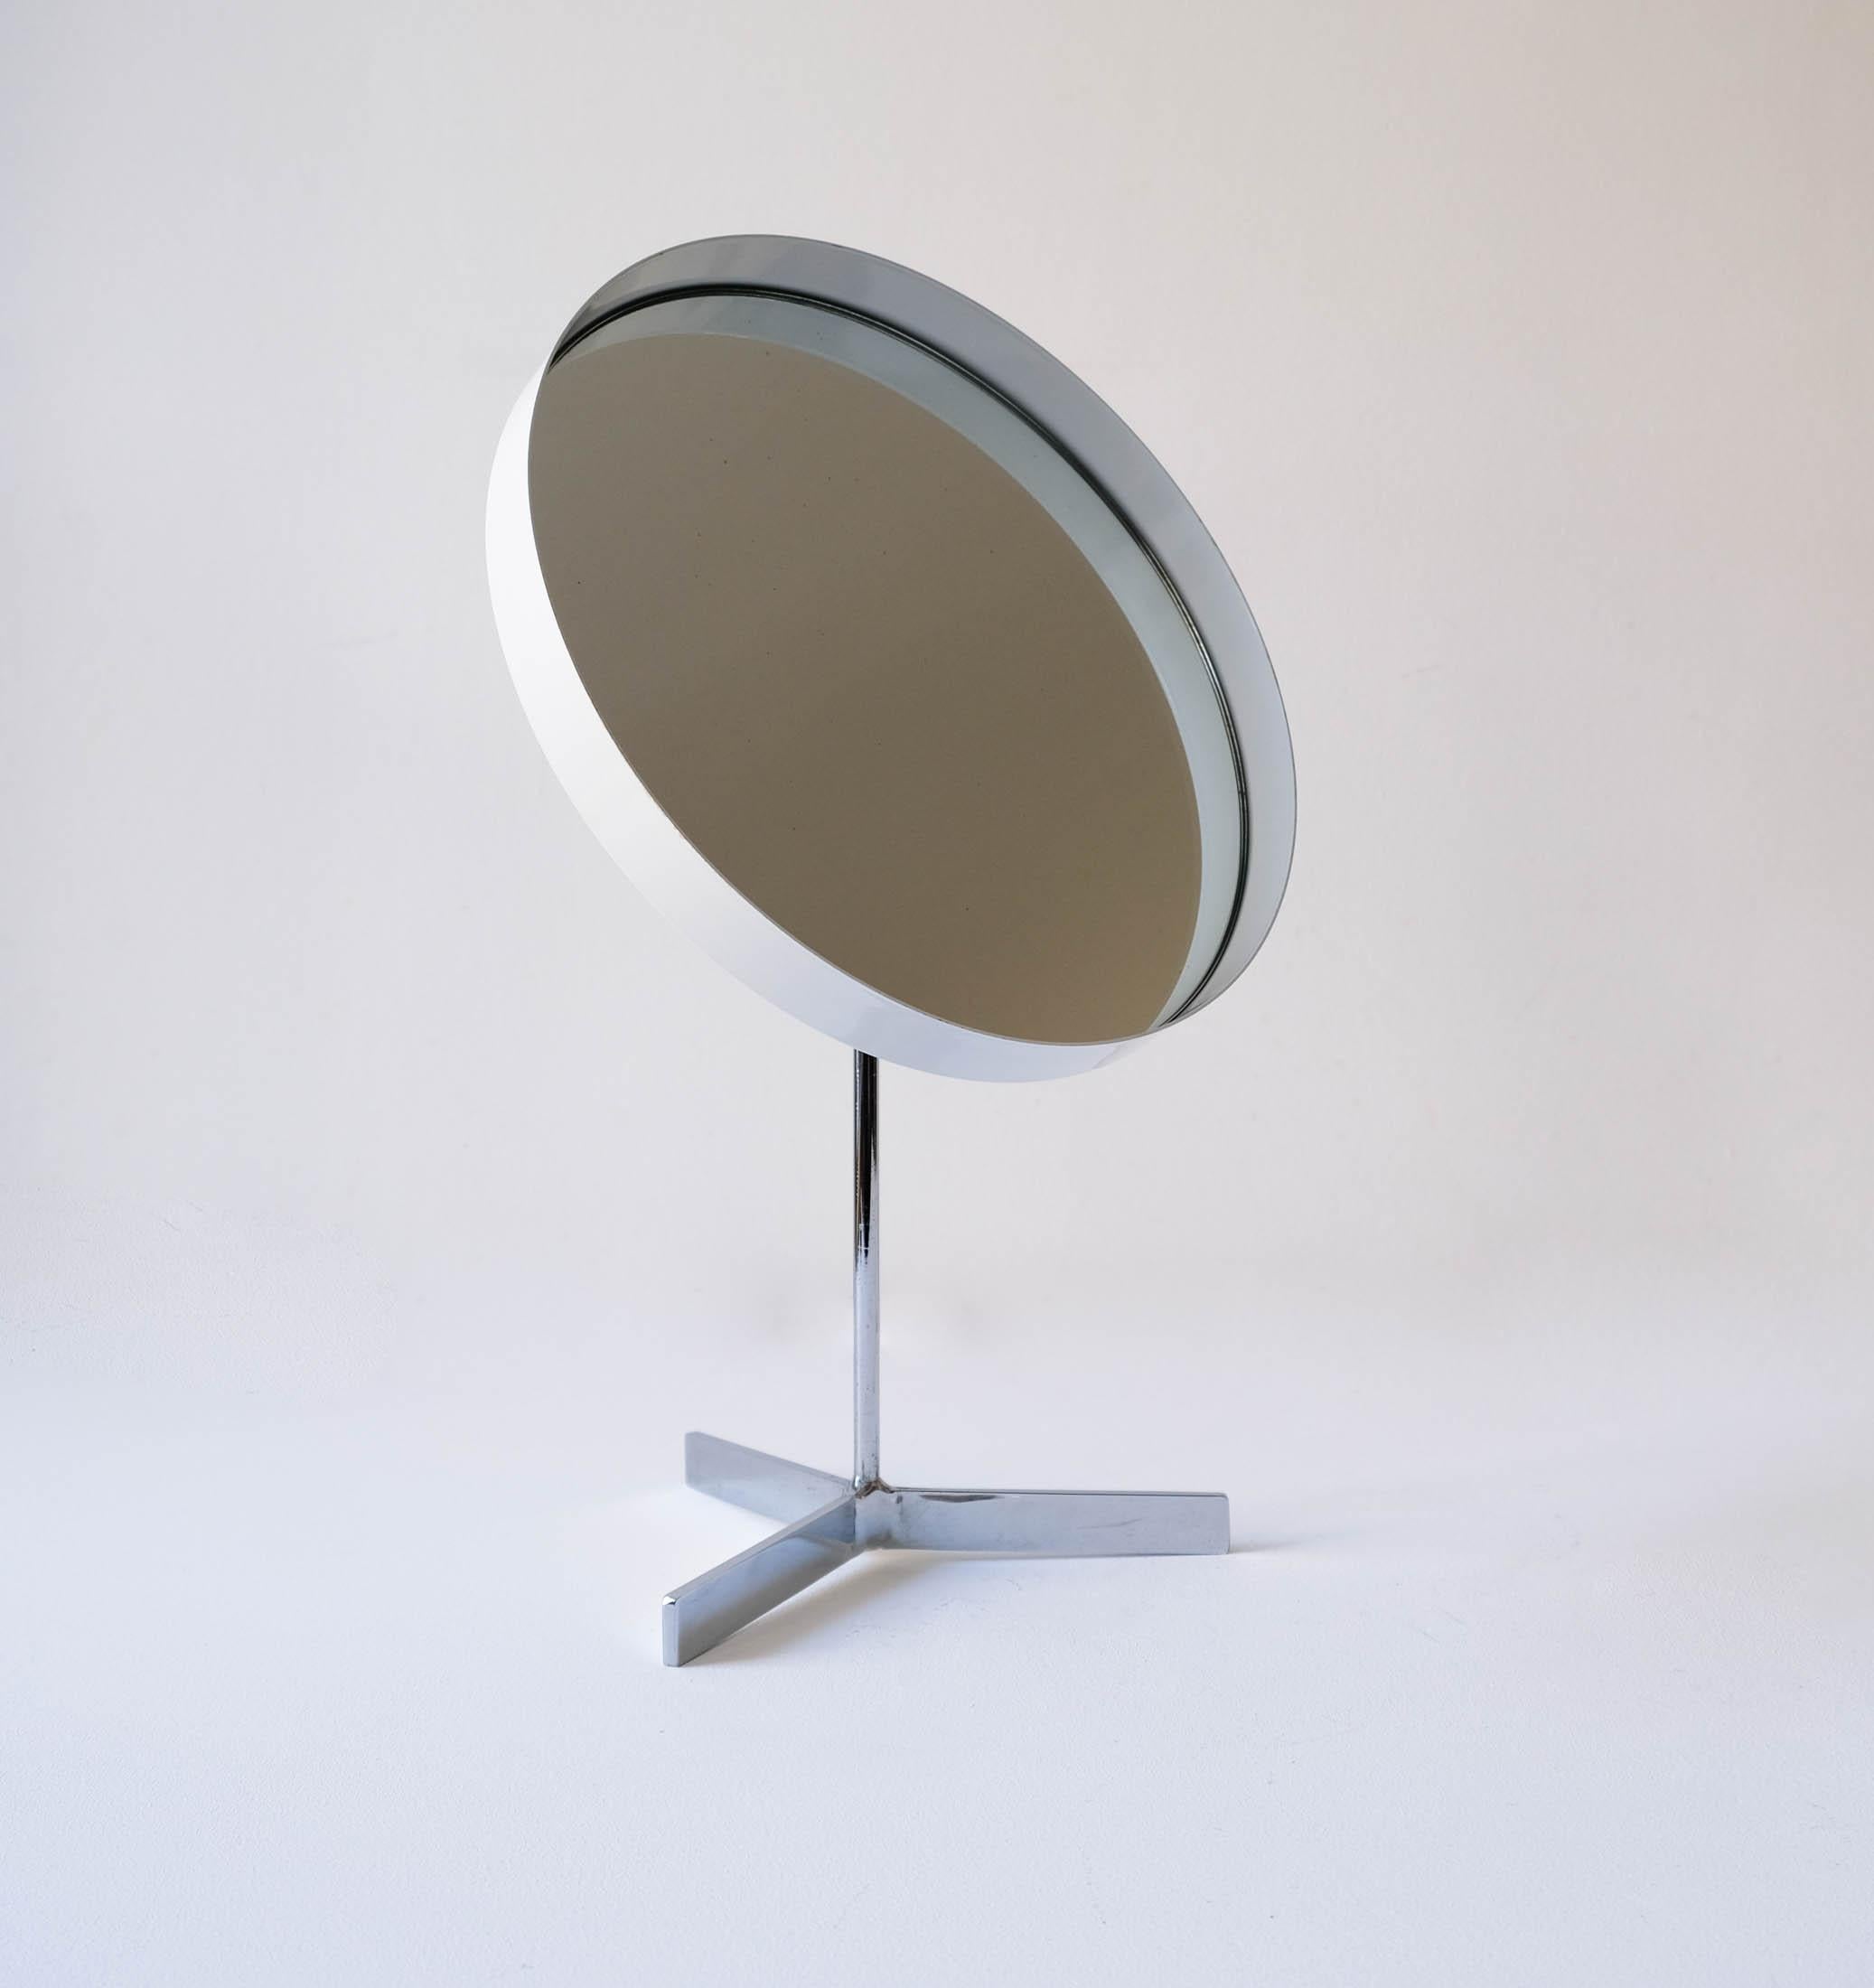 For sale a vintage mid-century white vanity table mirror, by Durlston Designs, UK c.1960s.

The mirror is in good vintage condition, with marks & scratches to the paintwork commensurate with 50+ years of age & careful use. The mirror has some